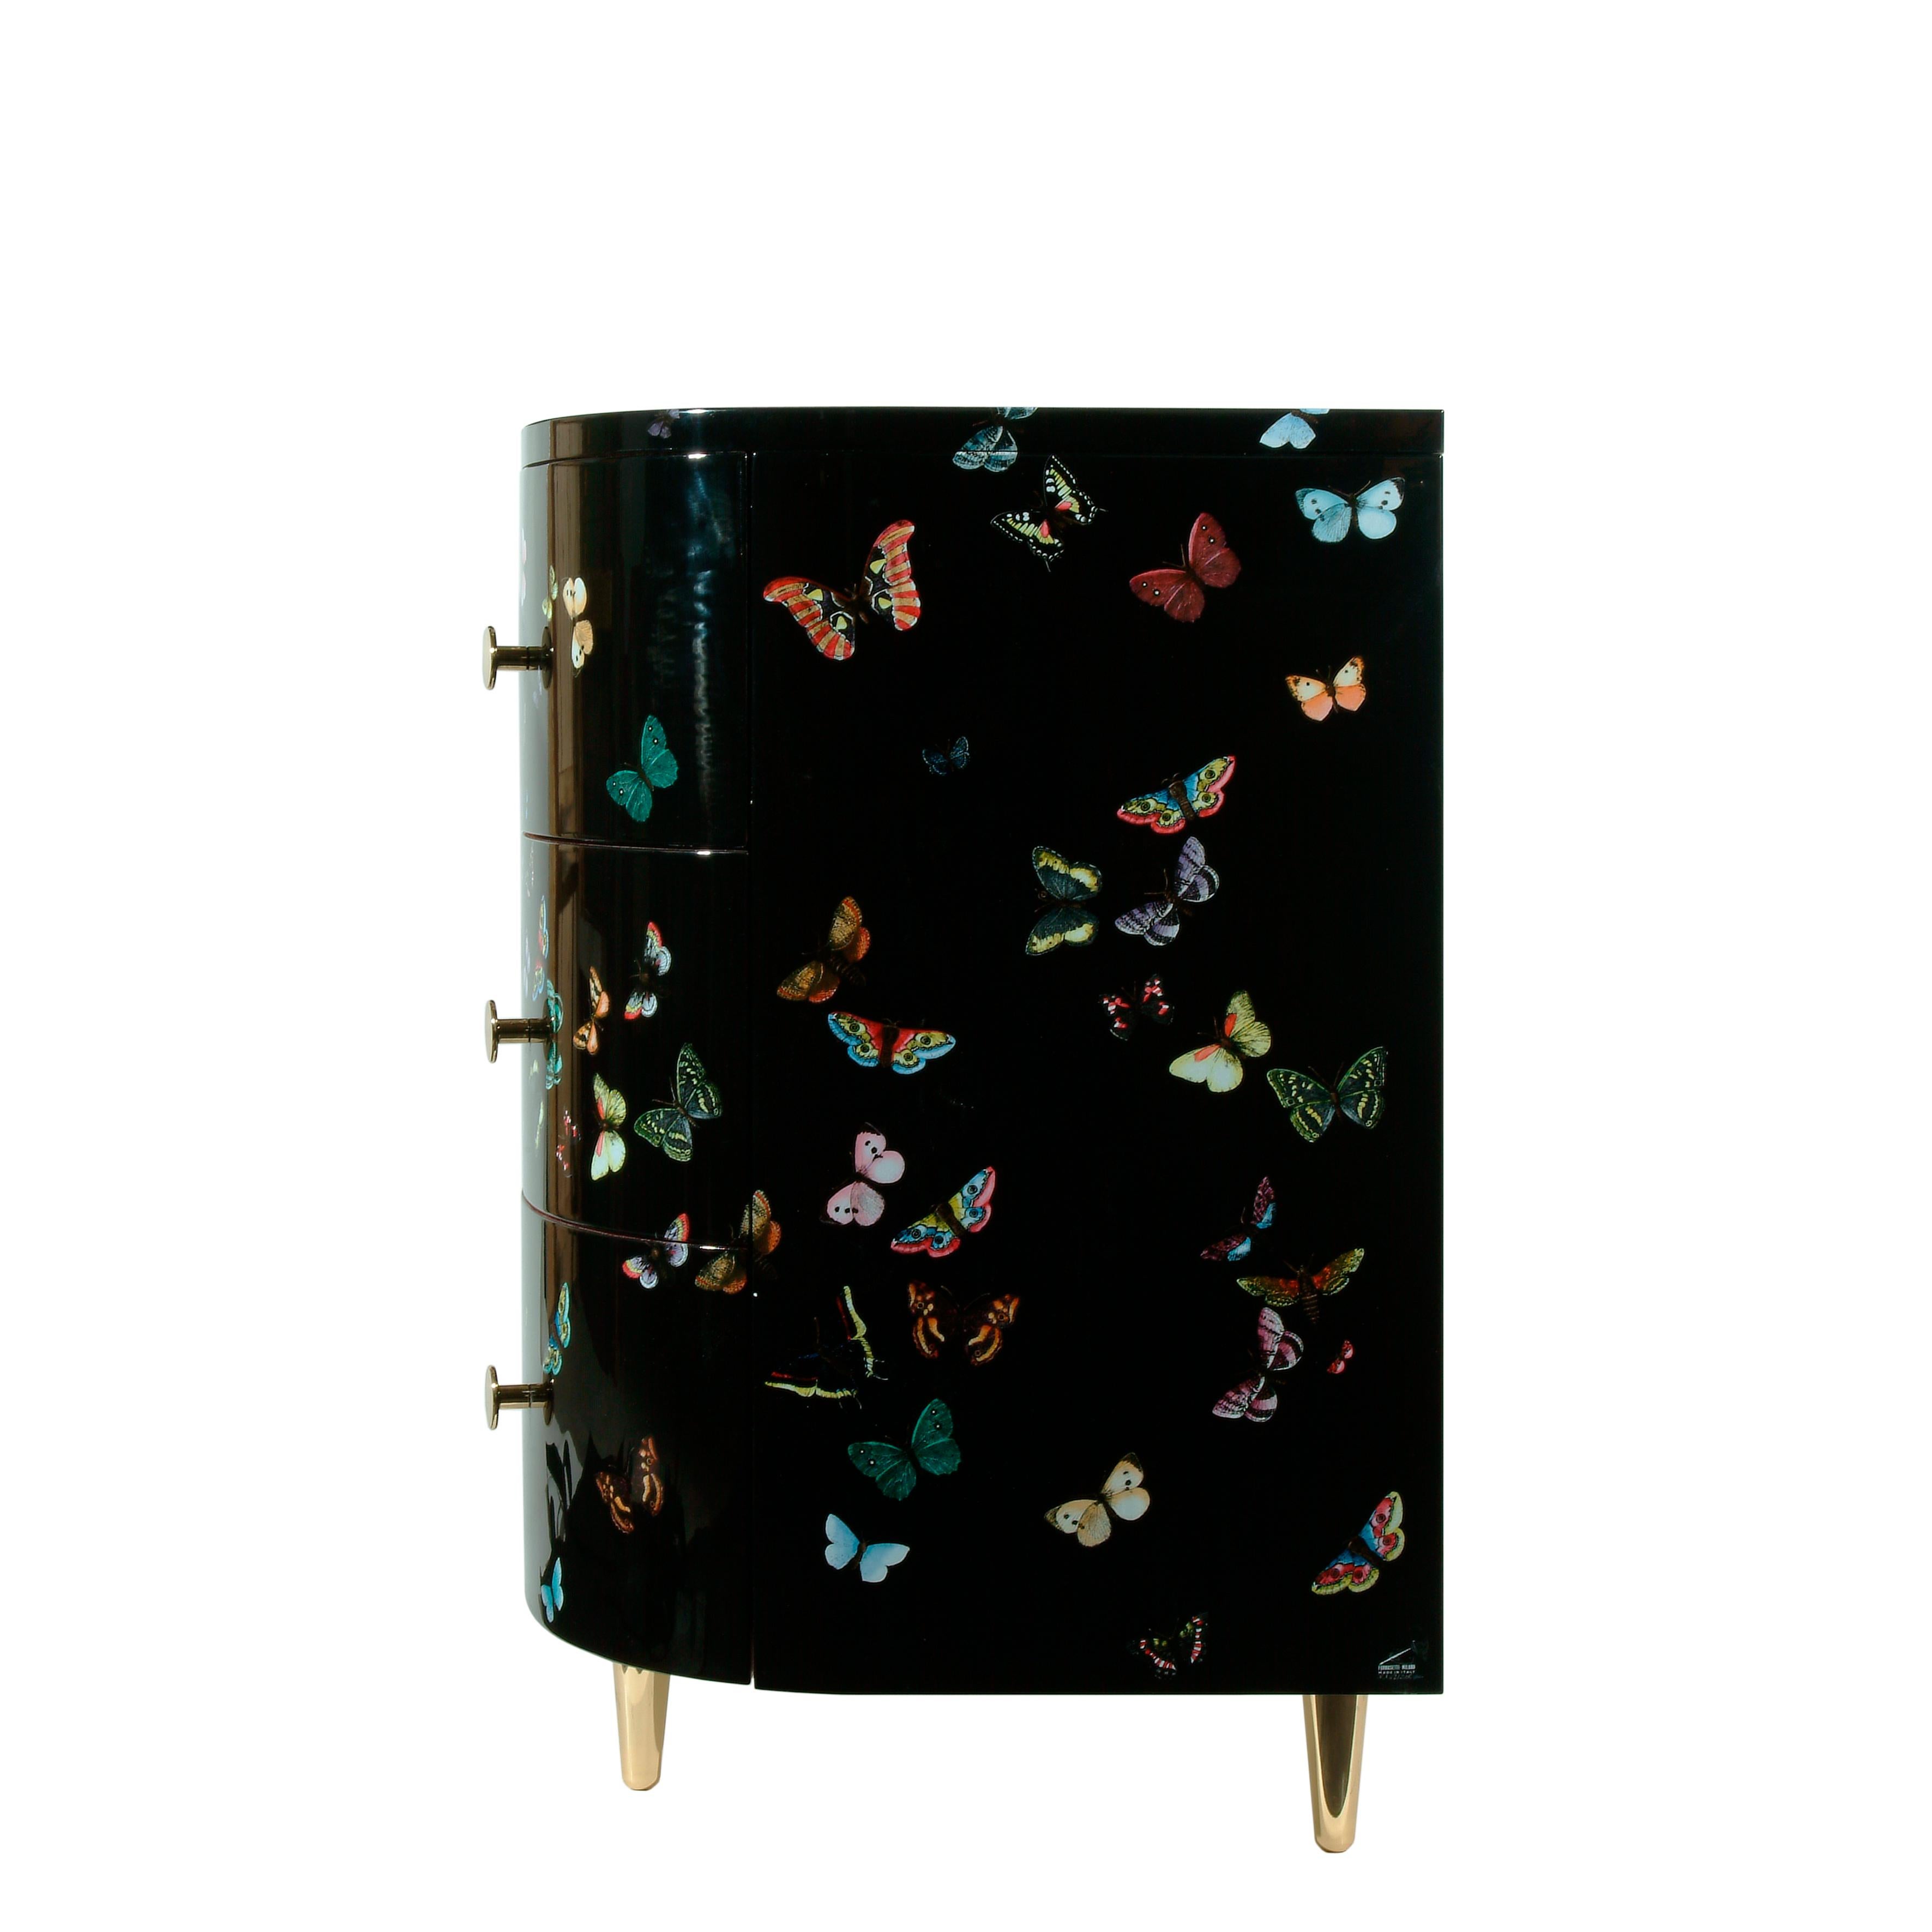 Like all Fornasetti pieces of furniture, it is handcrafted using original artisan techniques.
This corner cabinet is silk-screened by hand, hand-panited and covered with a smooth lacquer.

The decoration depicts the iconic Fornasetti butterflies